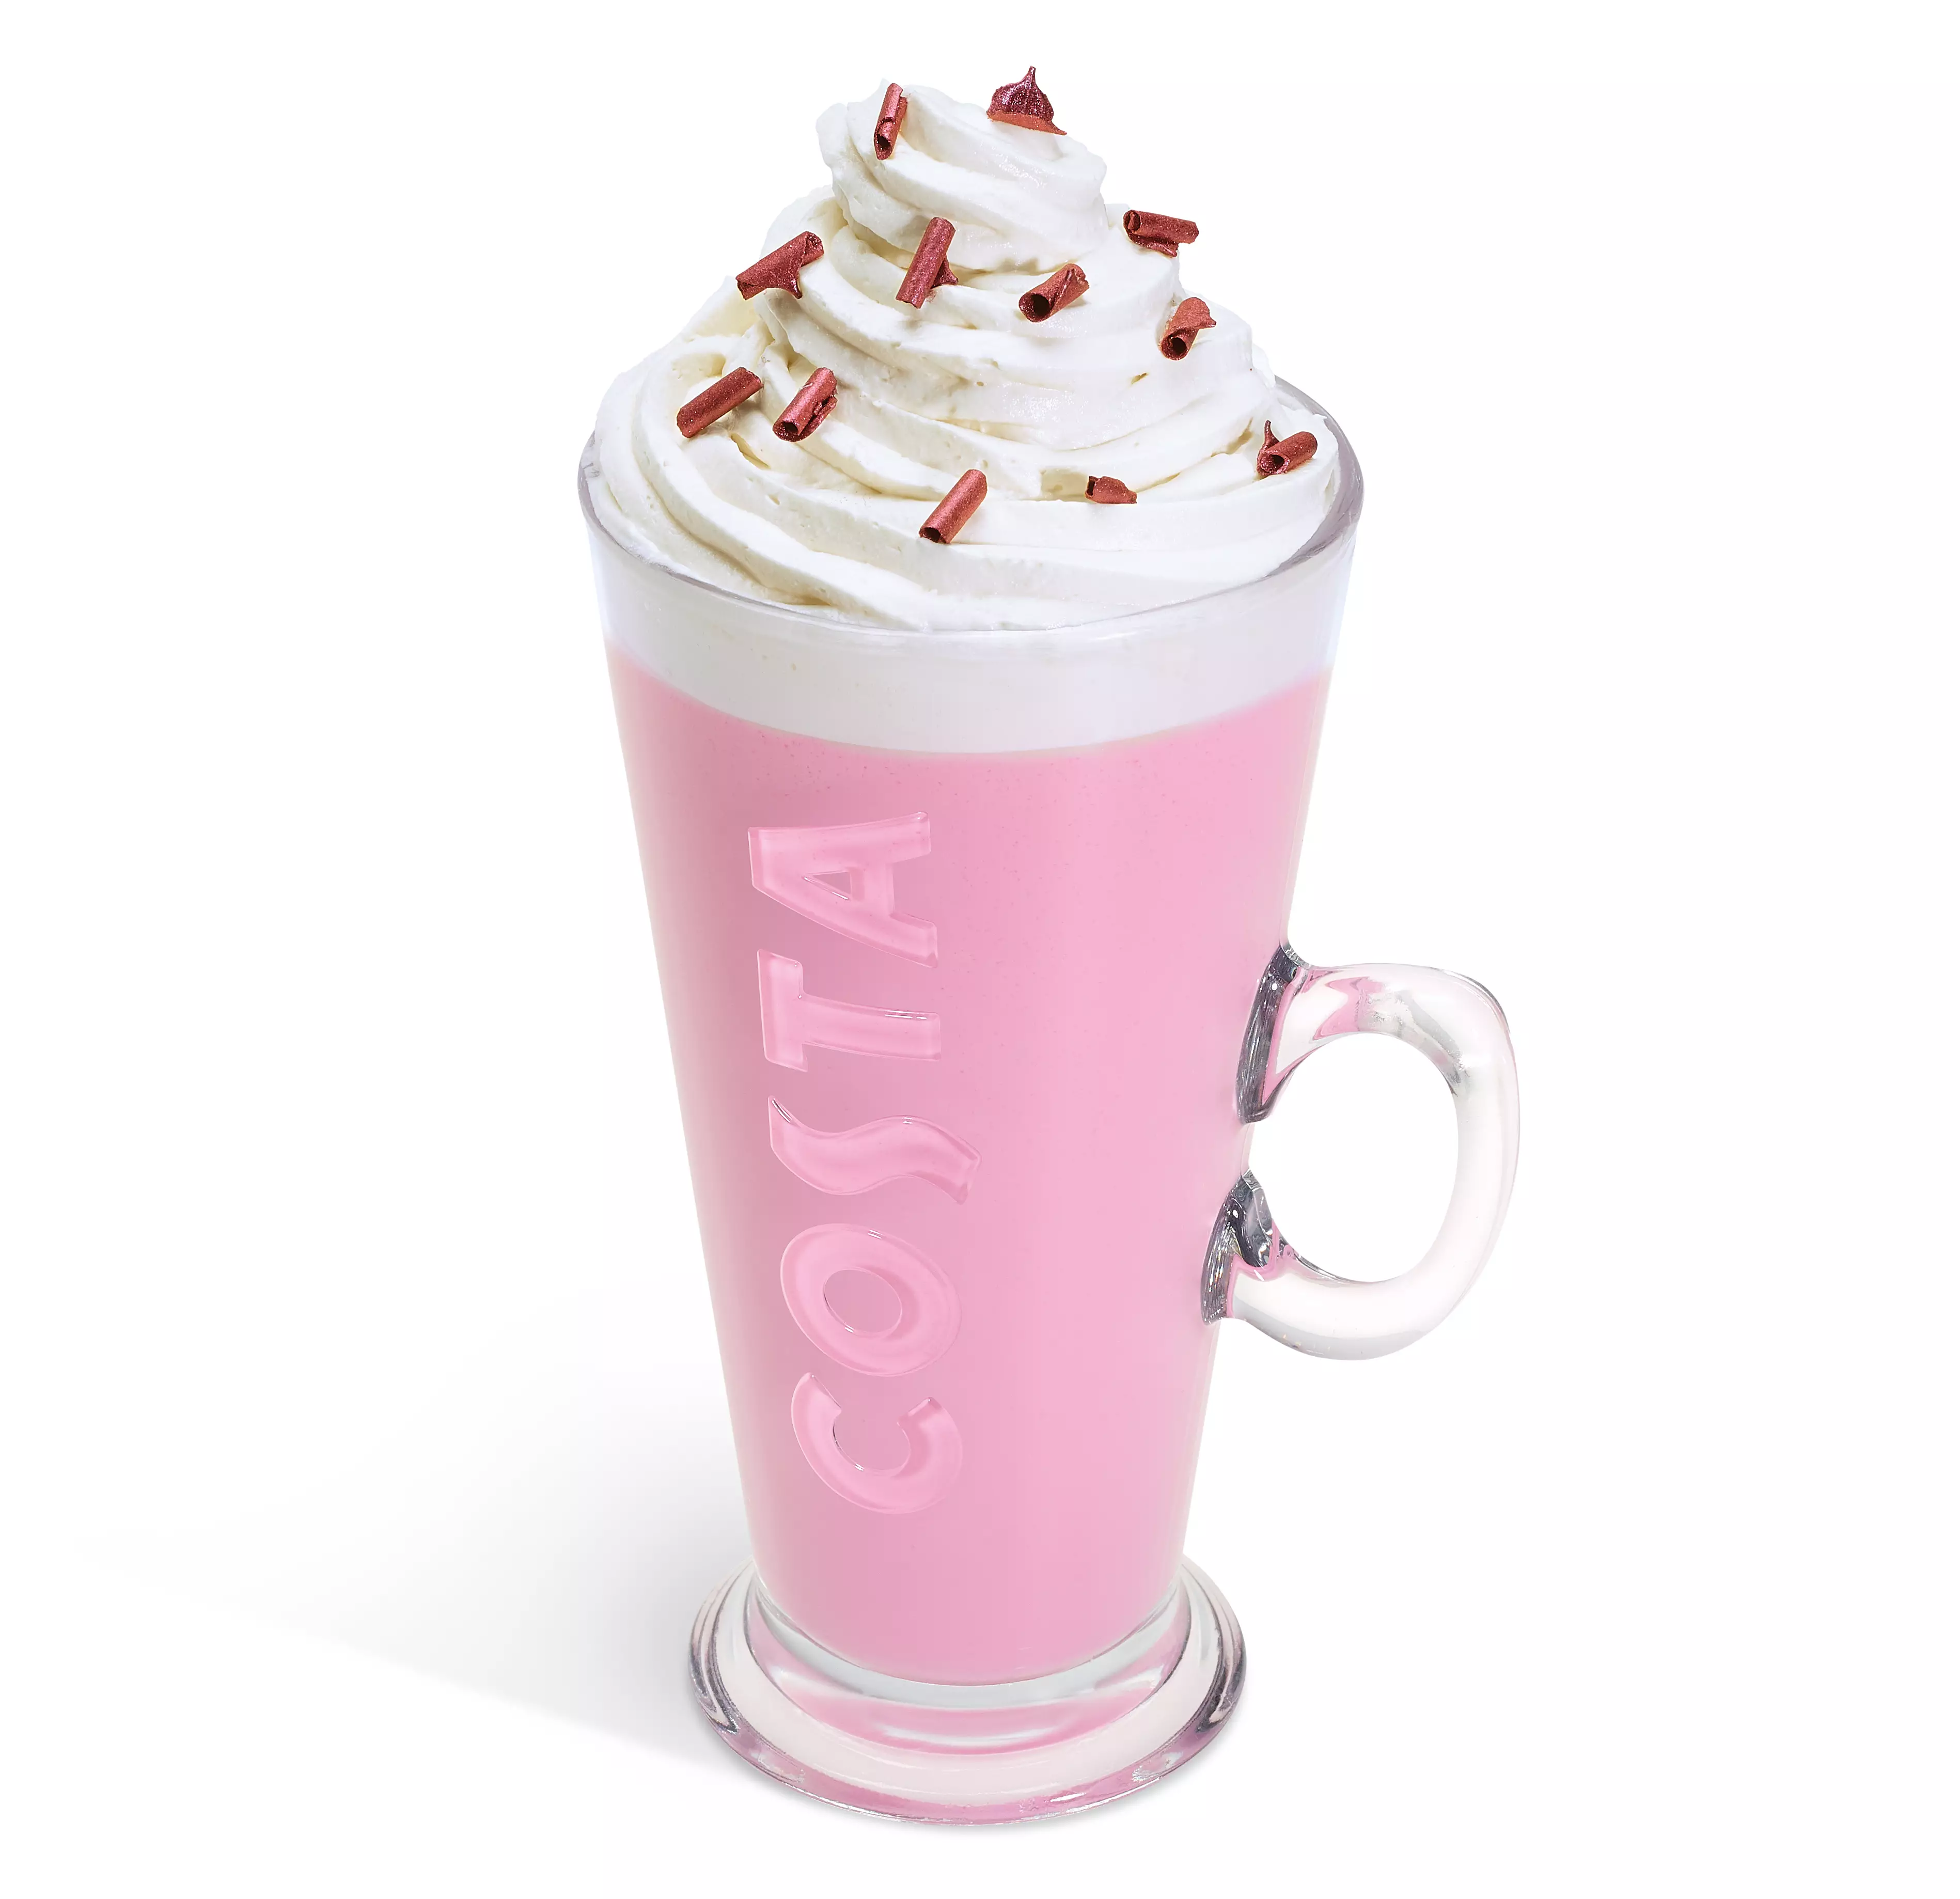 The Ruby Cocoa Hot Chocolate is back by popular demand (